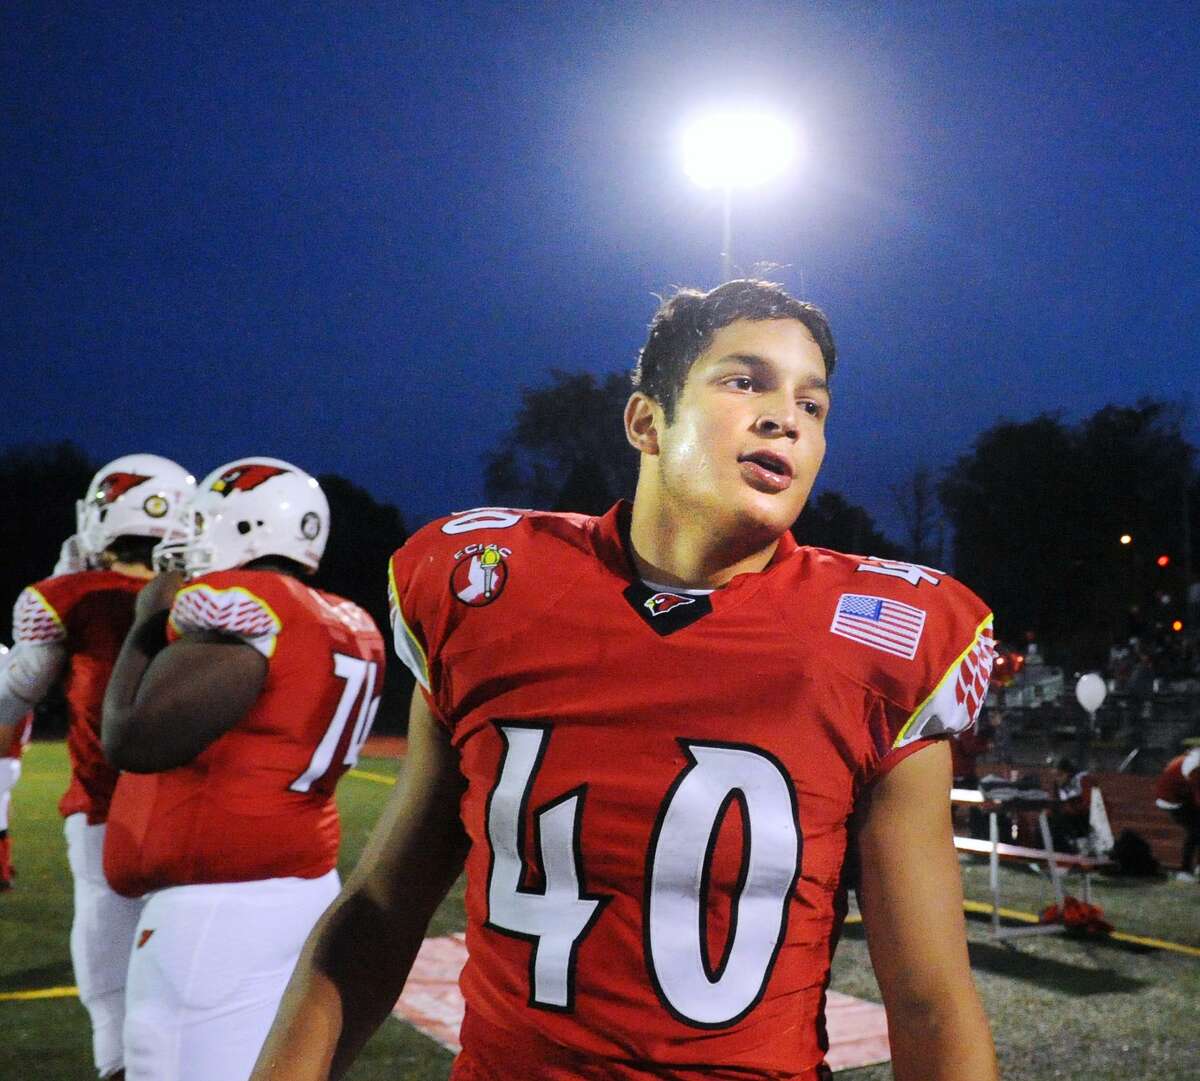 Greenwich’s Tysen Comizio rushed for 1,379 yards with 20 touchdowns last season.